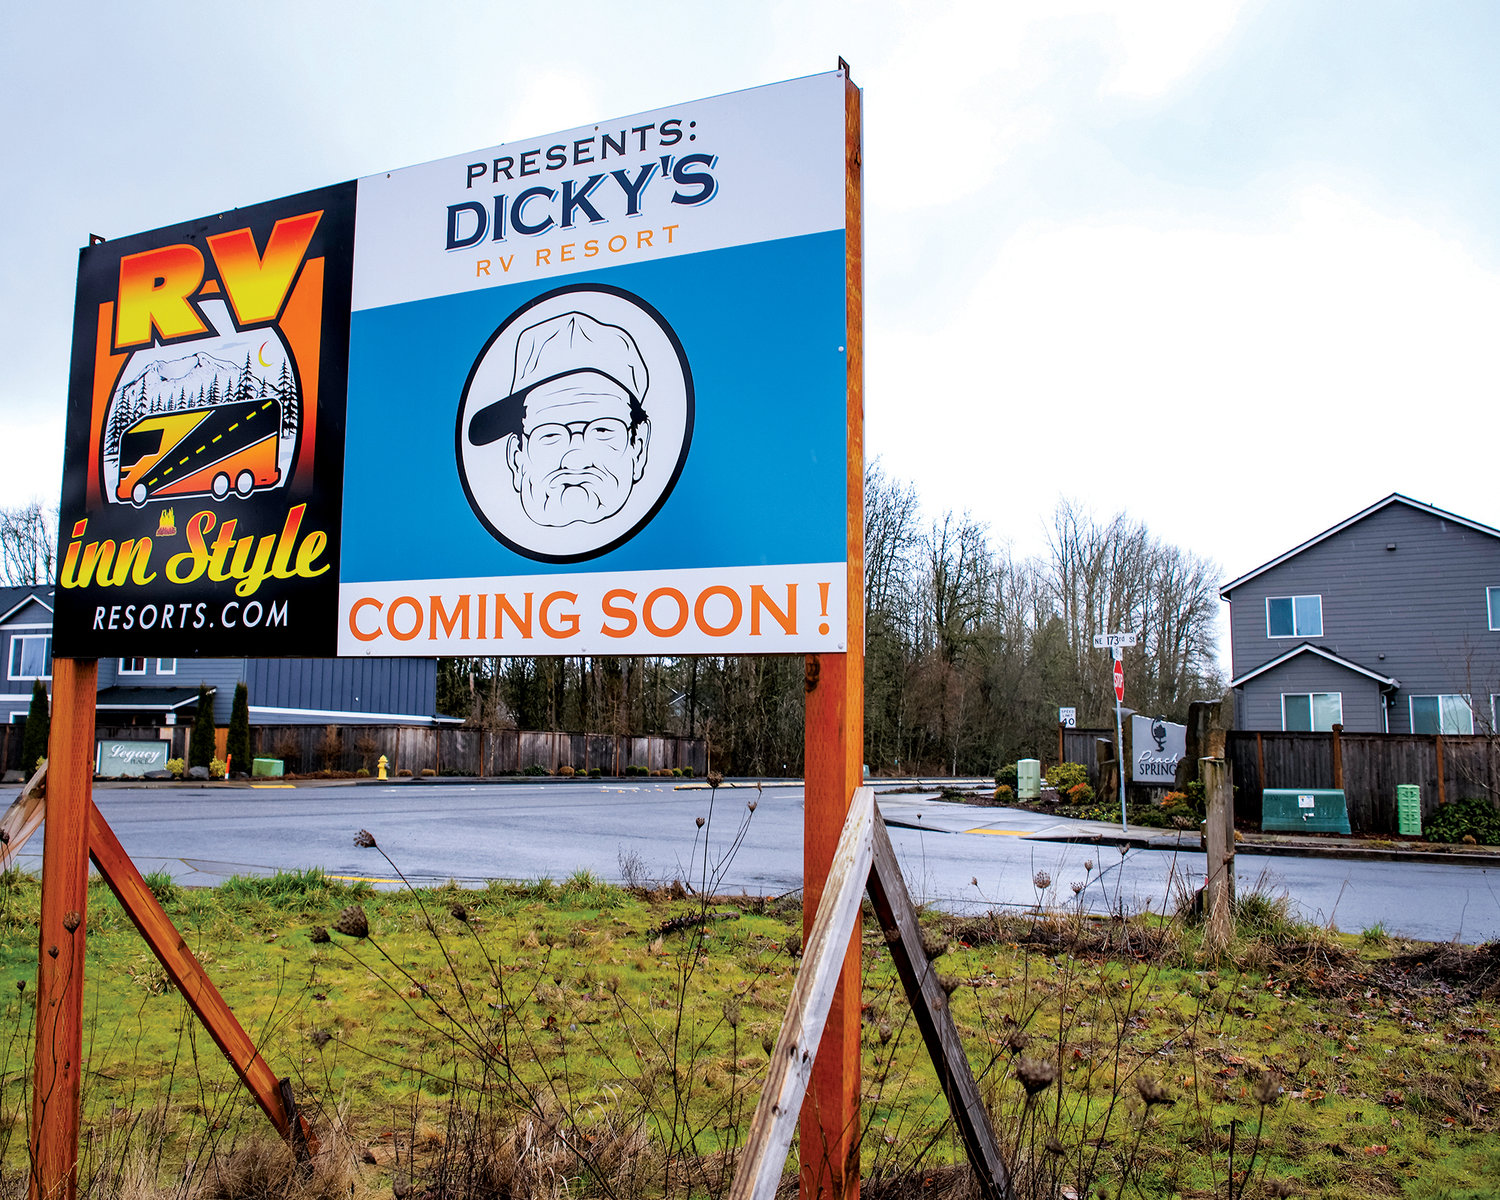 RV inn Style broke ground on their upcoming Dicky's RV Resort at the intersection of Northeast 15th Avenue and Northeast 173rd Street near the Clark County Fairgrounds on Tuesday, Feb. 28.